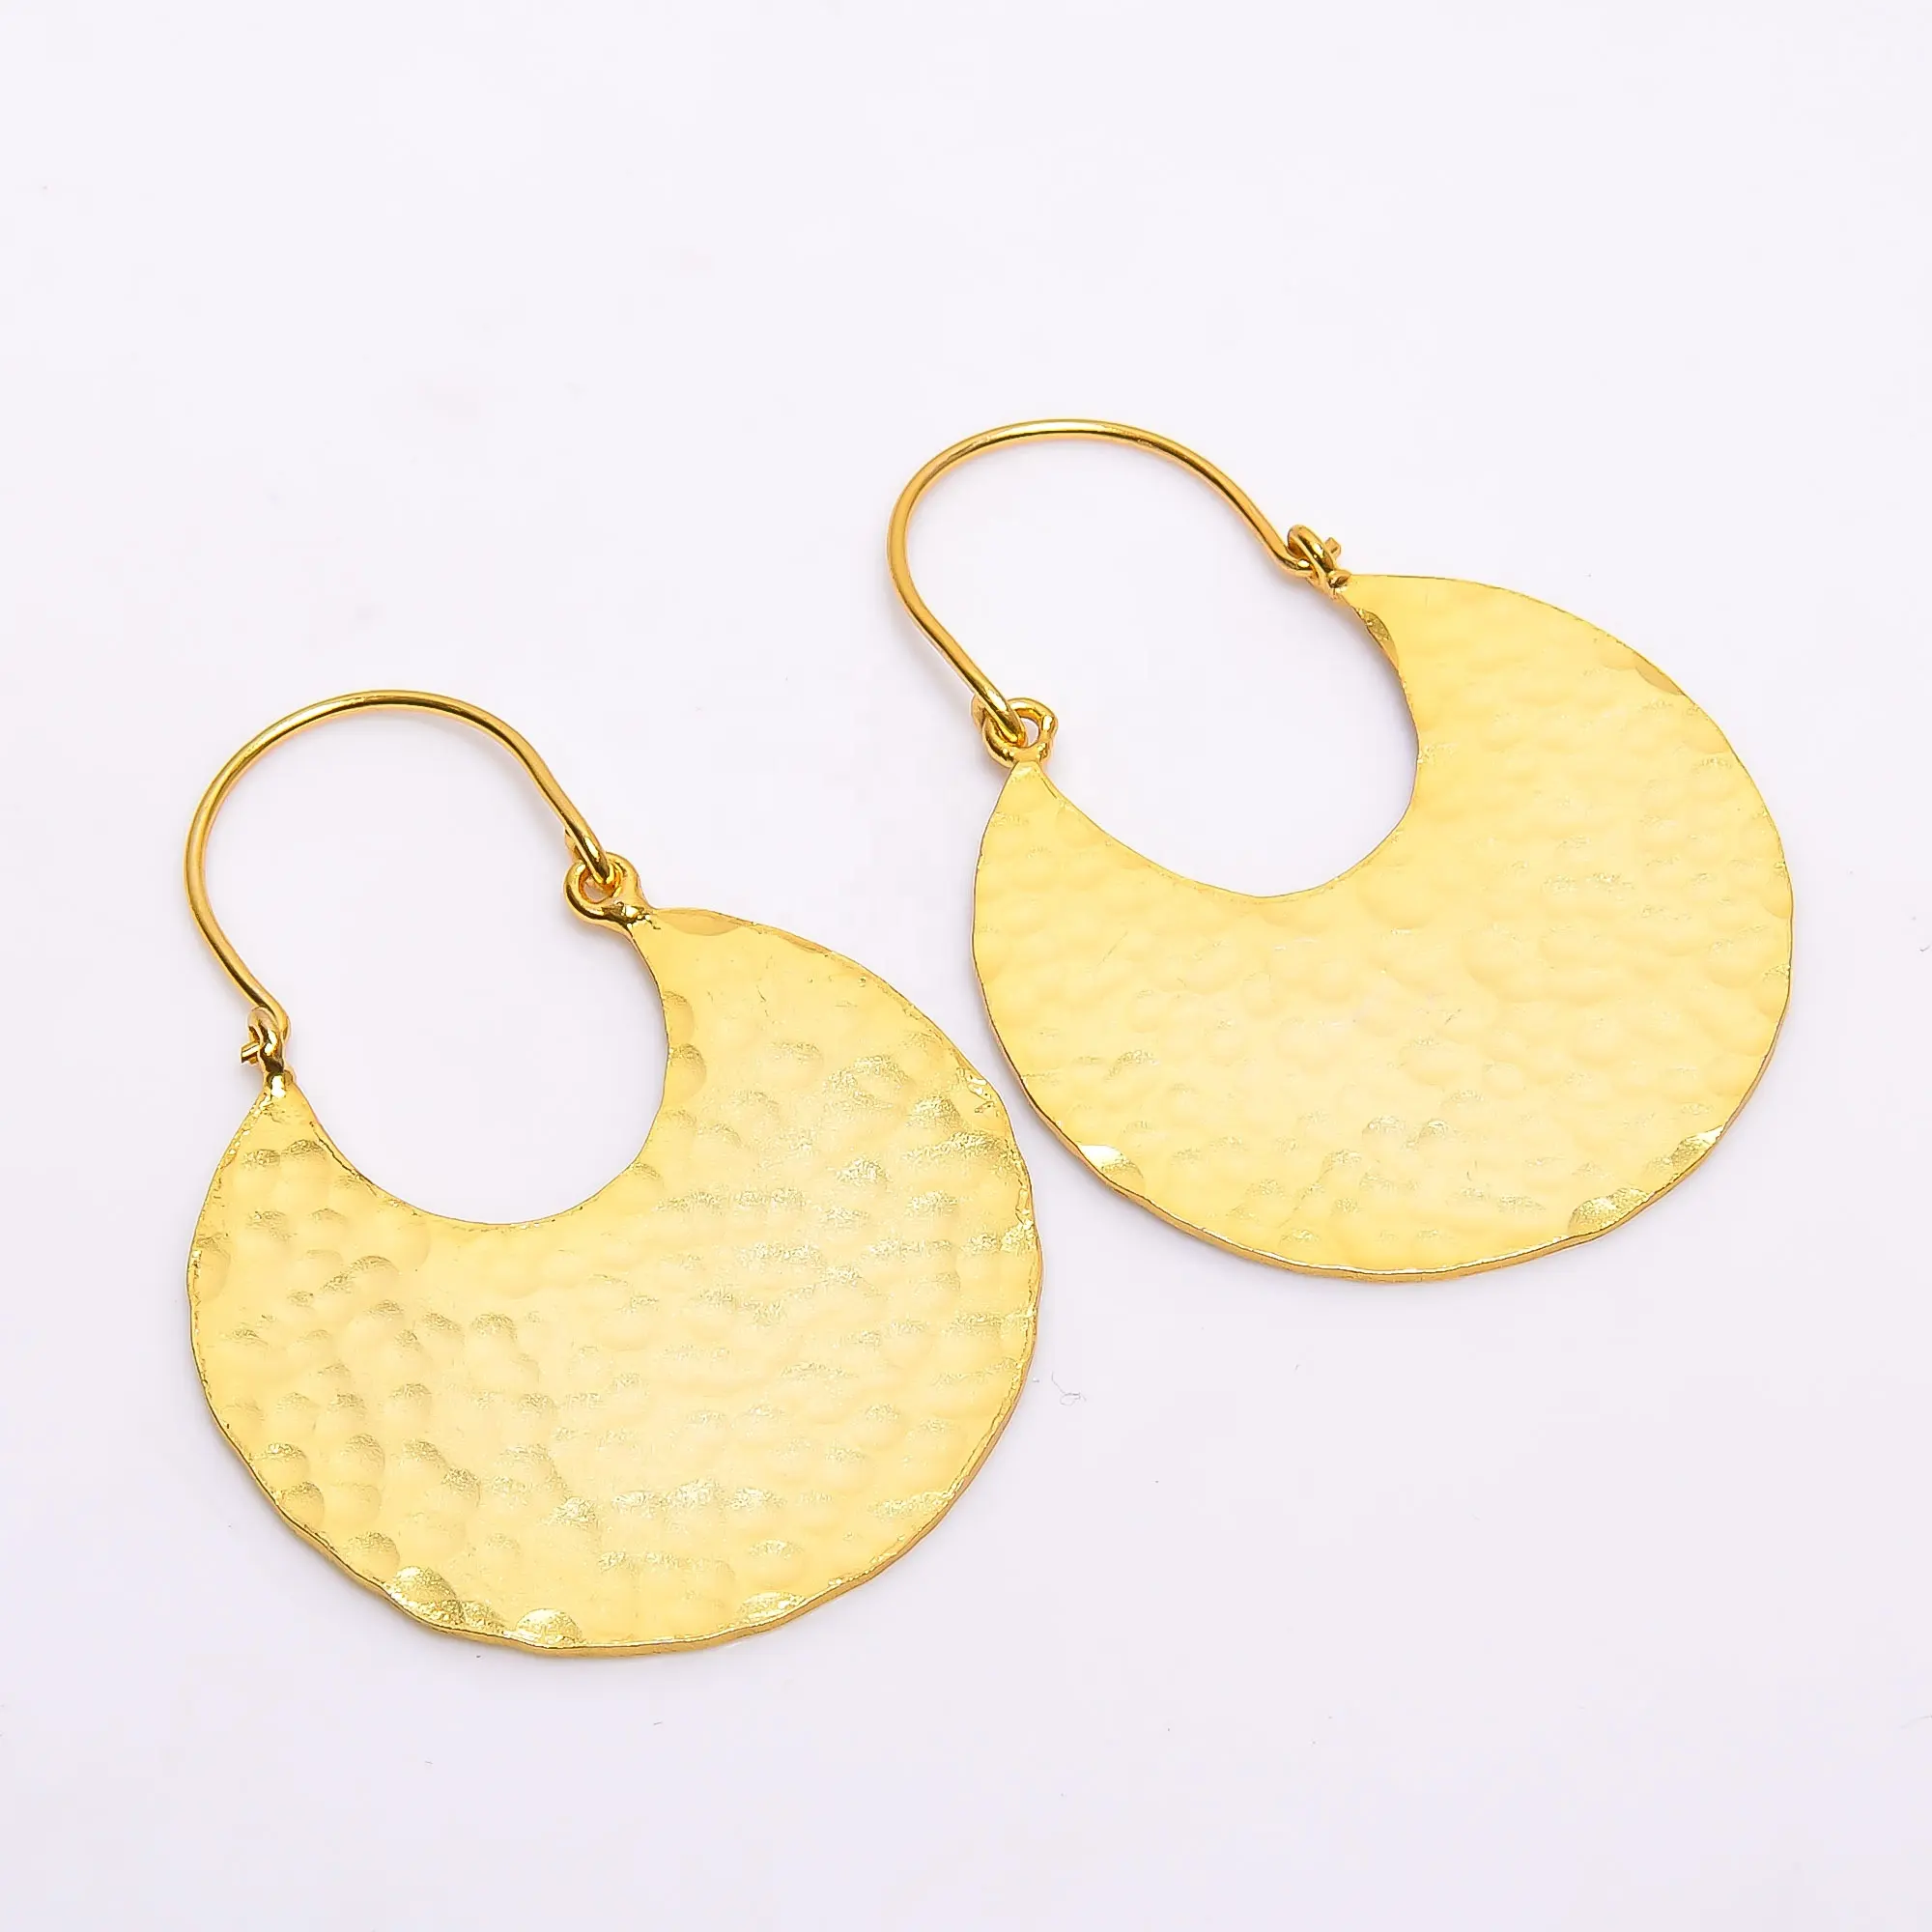 Hammered Earrings Fashion Latest Style Wholesale price Earrings 1 Micron Gold Plated Brass Jewelry